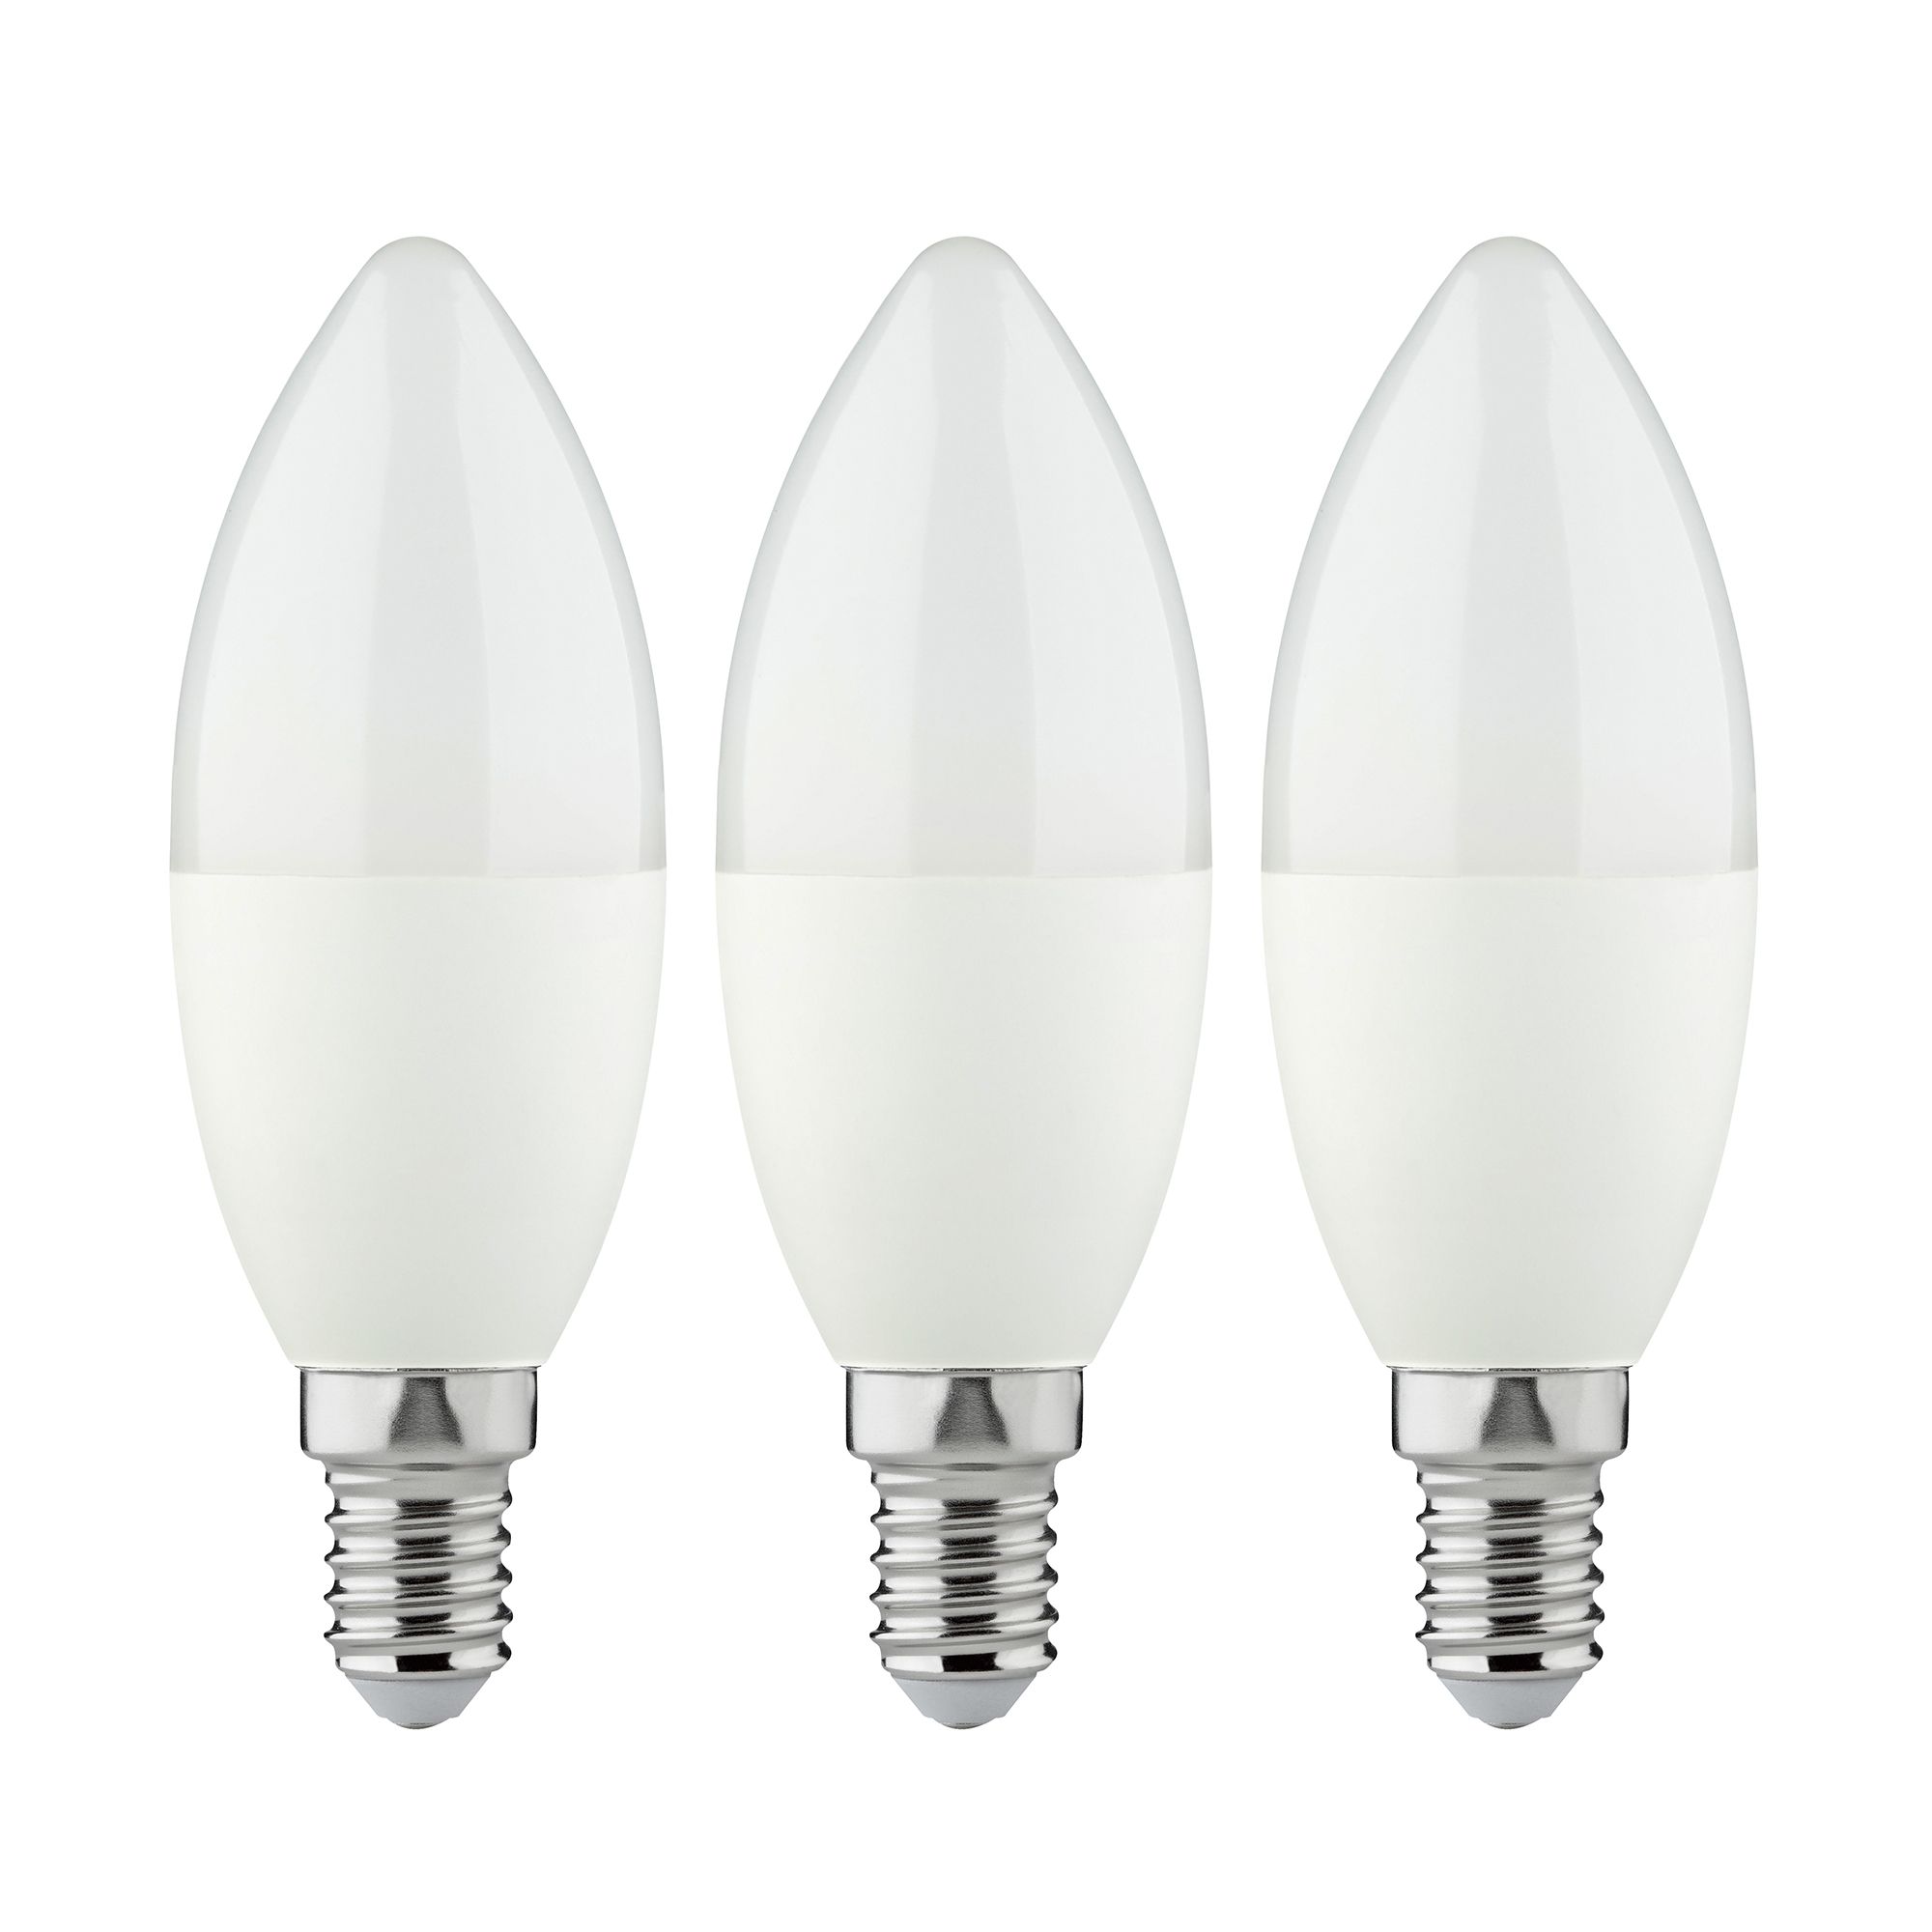 Diall E14 6.5W 806lm Frosted Candle Neutral white LED Light bulb, Pack of 3